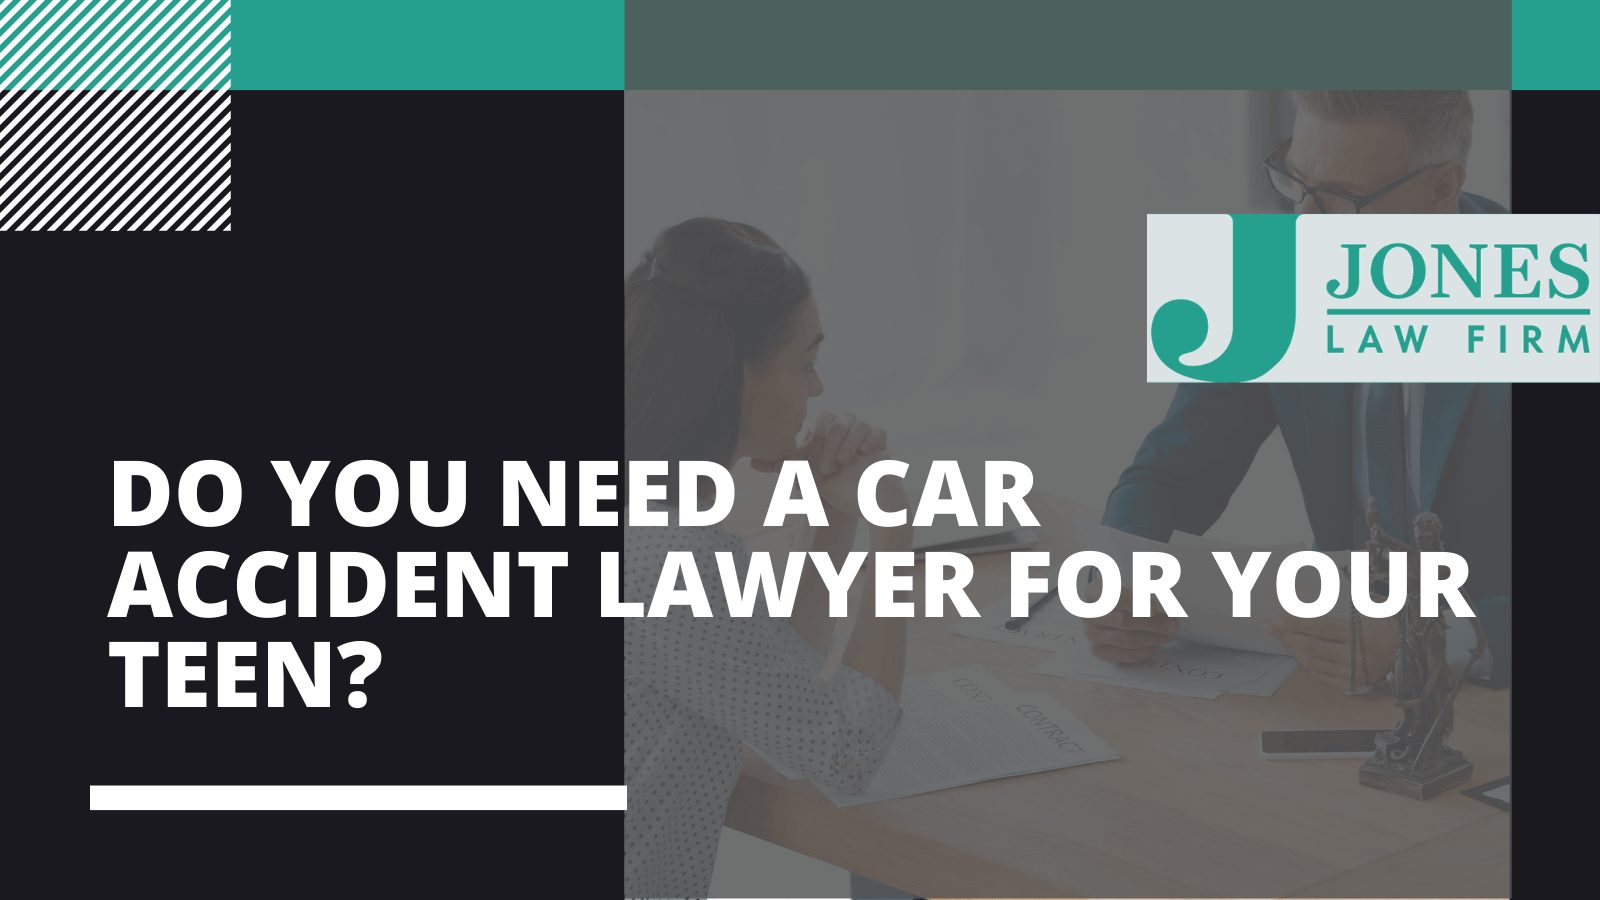 Do You Need A Car Accident Lawyer For Your Teen? - Jones law firm - Alexandria louisiana